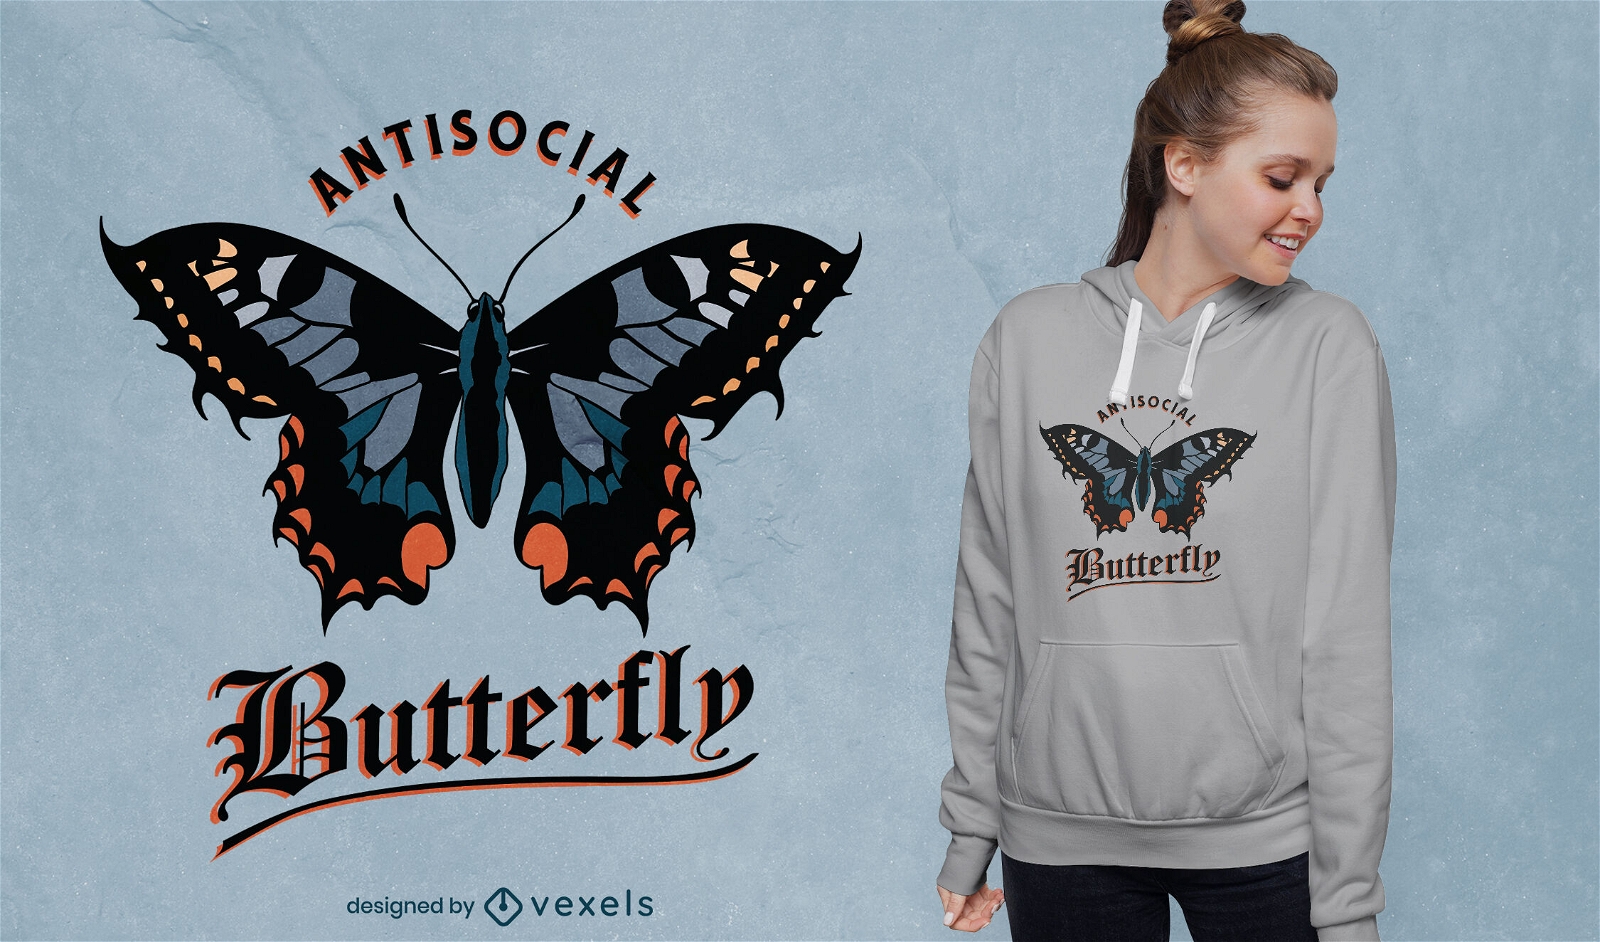 Great antisocial butterfly t-shirt design